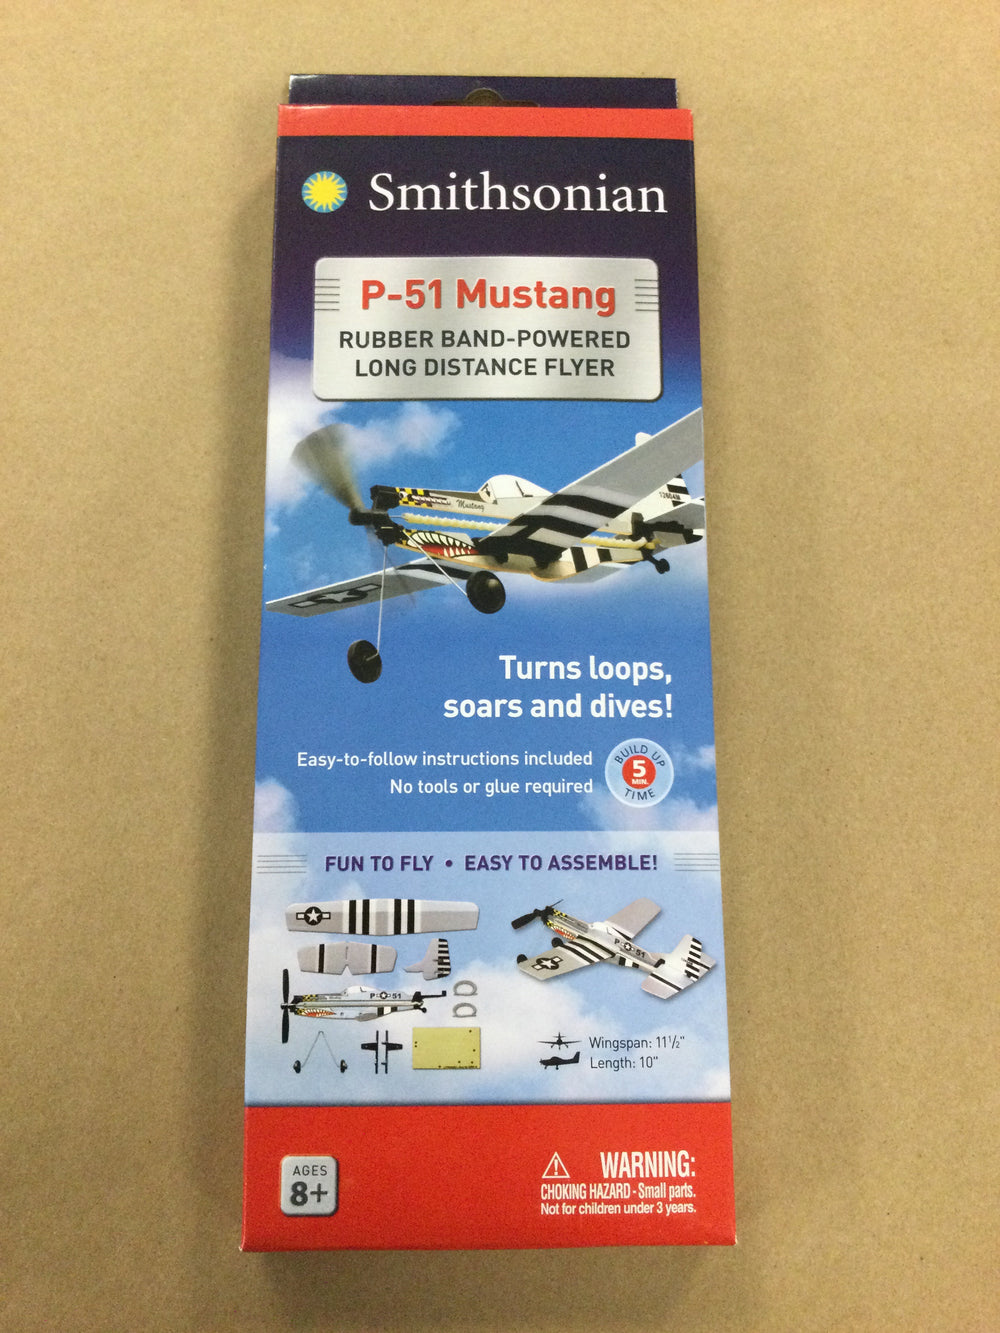 Smithsonian P-51 Rubber Band-Powered Long Distance Flyer